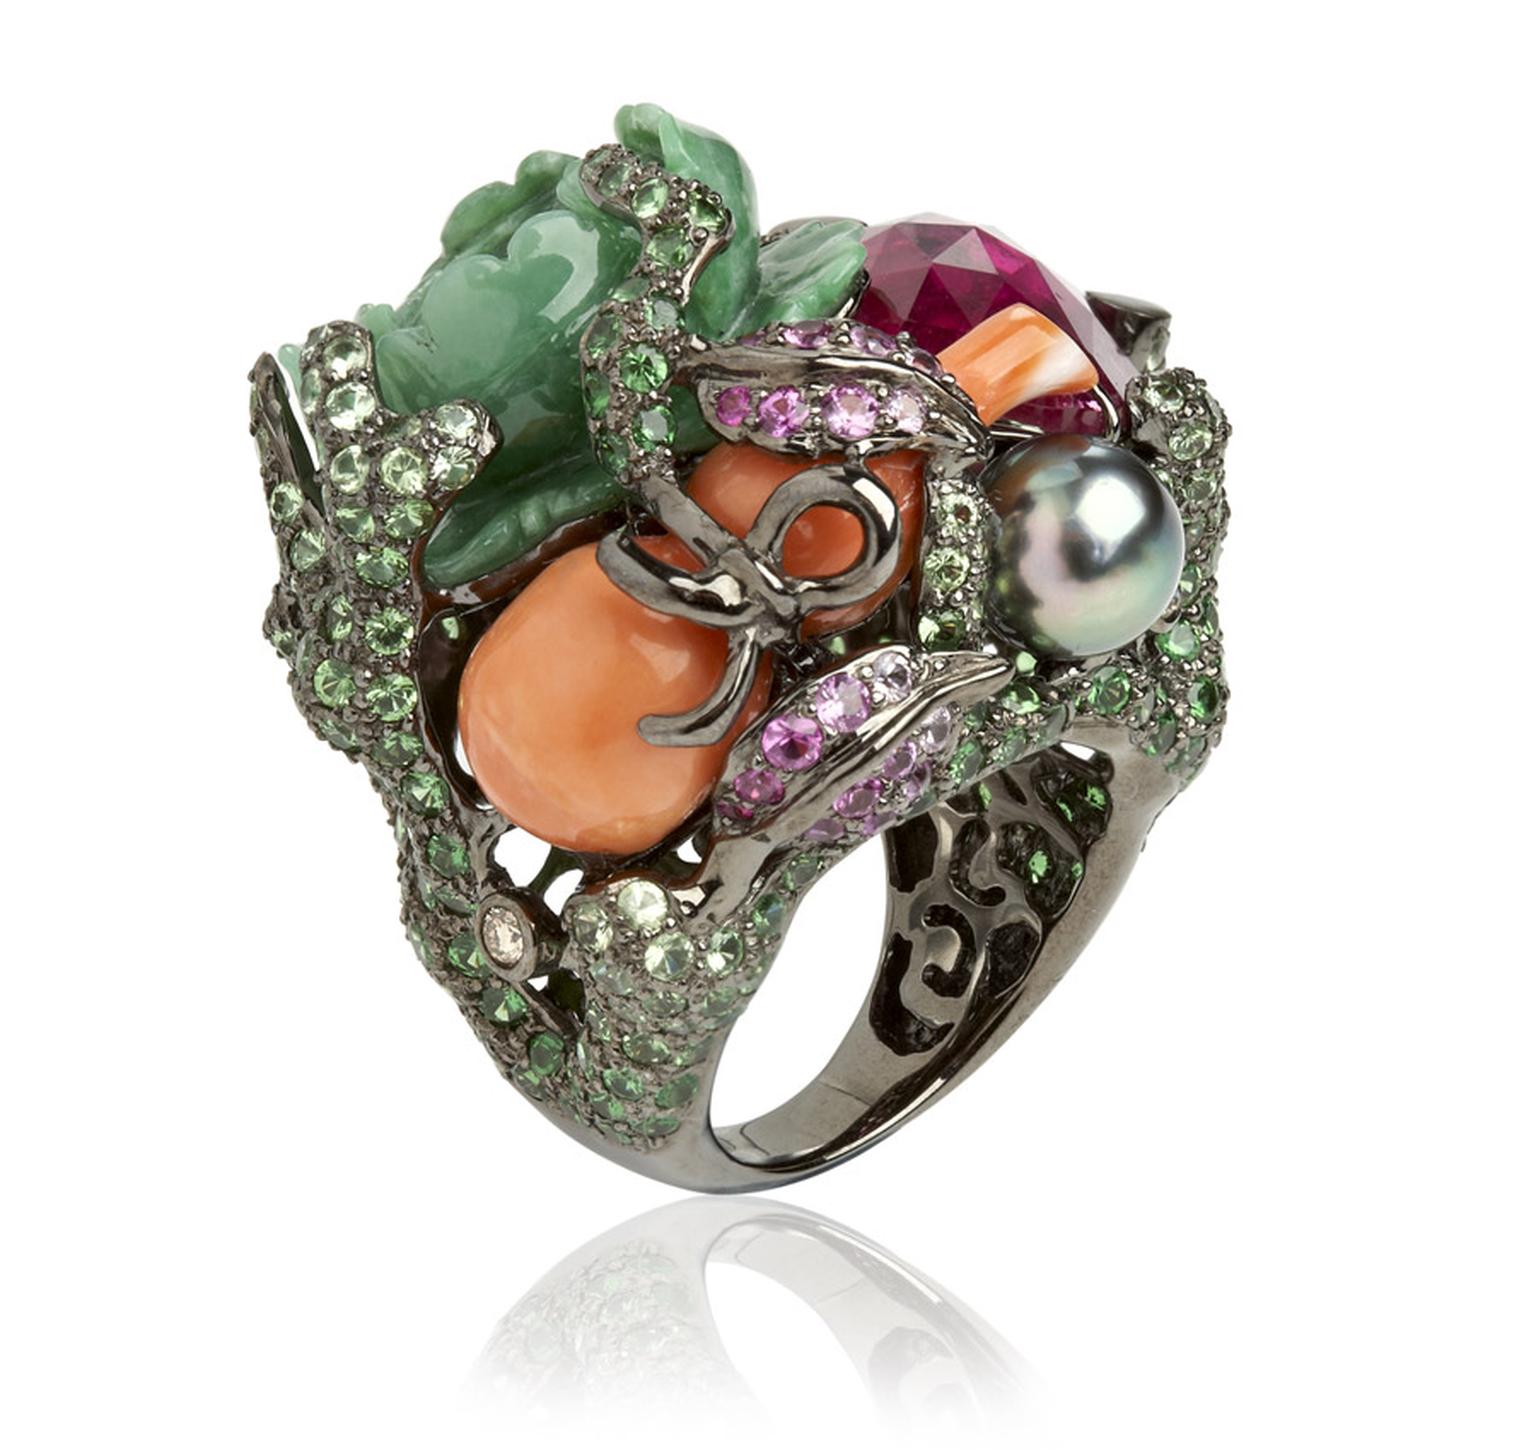 Wendy-Yue-Fantasie-18ct-white-gold,--diamond,-garnet,-sapphire,-pearl,-coral-and-jade-Jugle-Jumble-ring-By-Wendy--Yue-for-Annoushka-.jpg